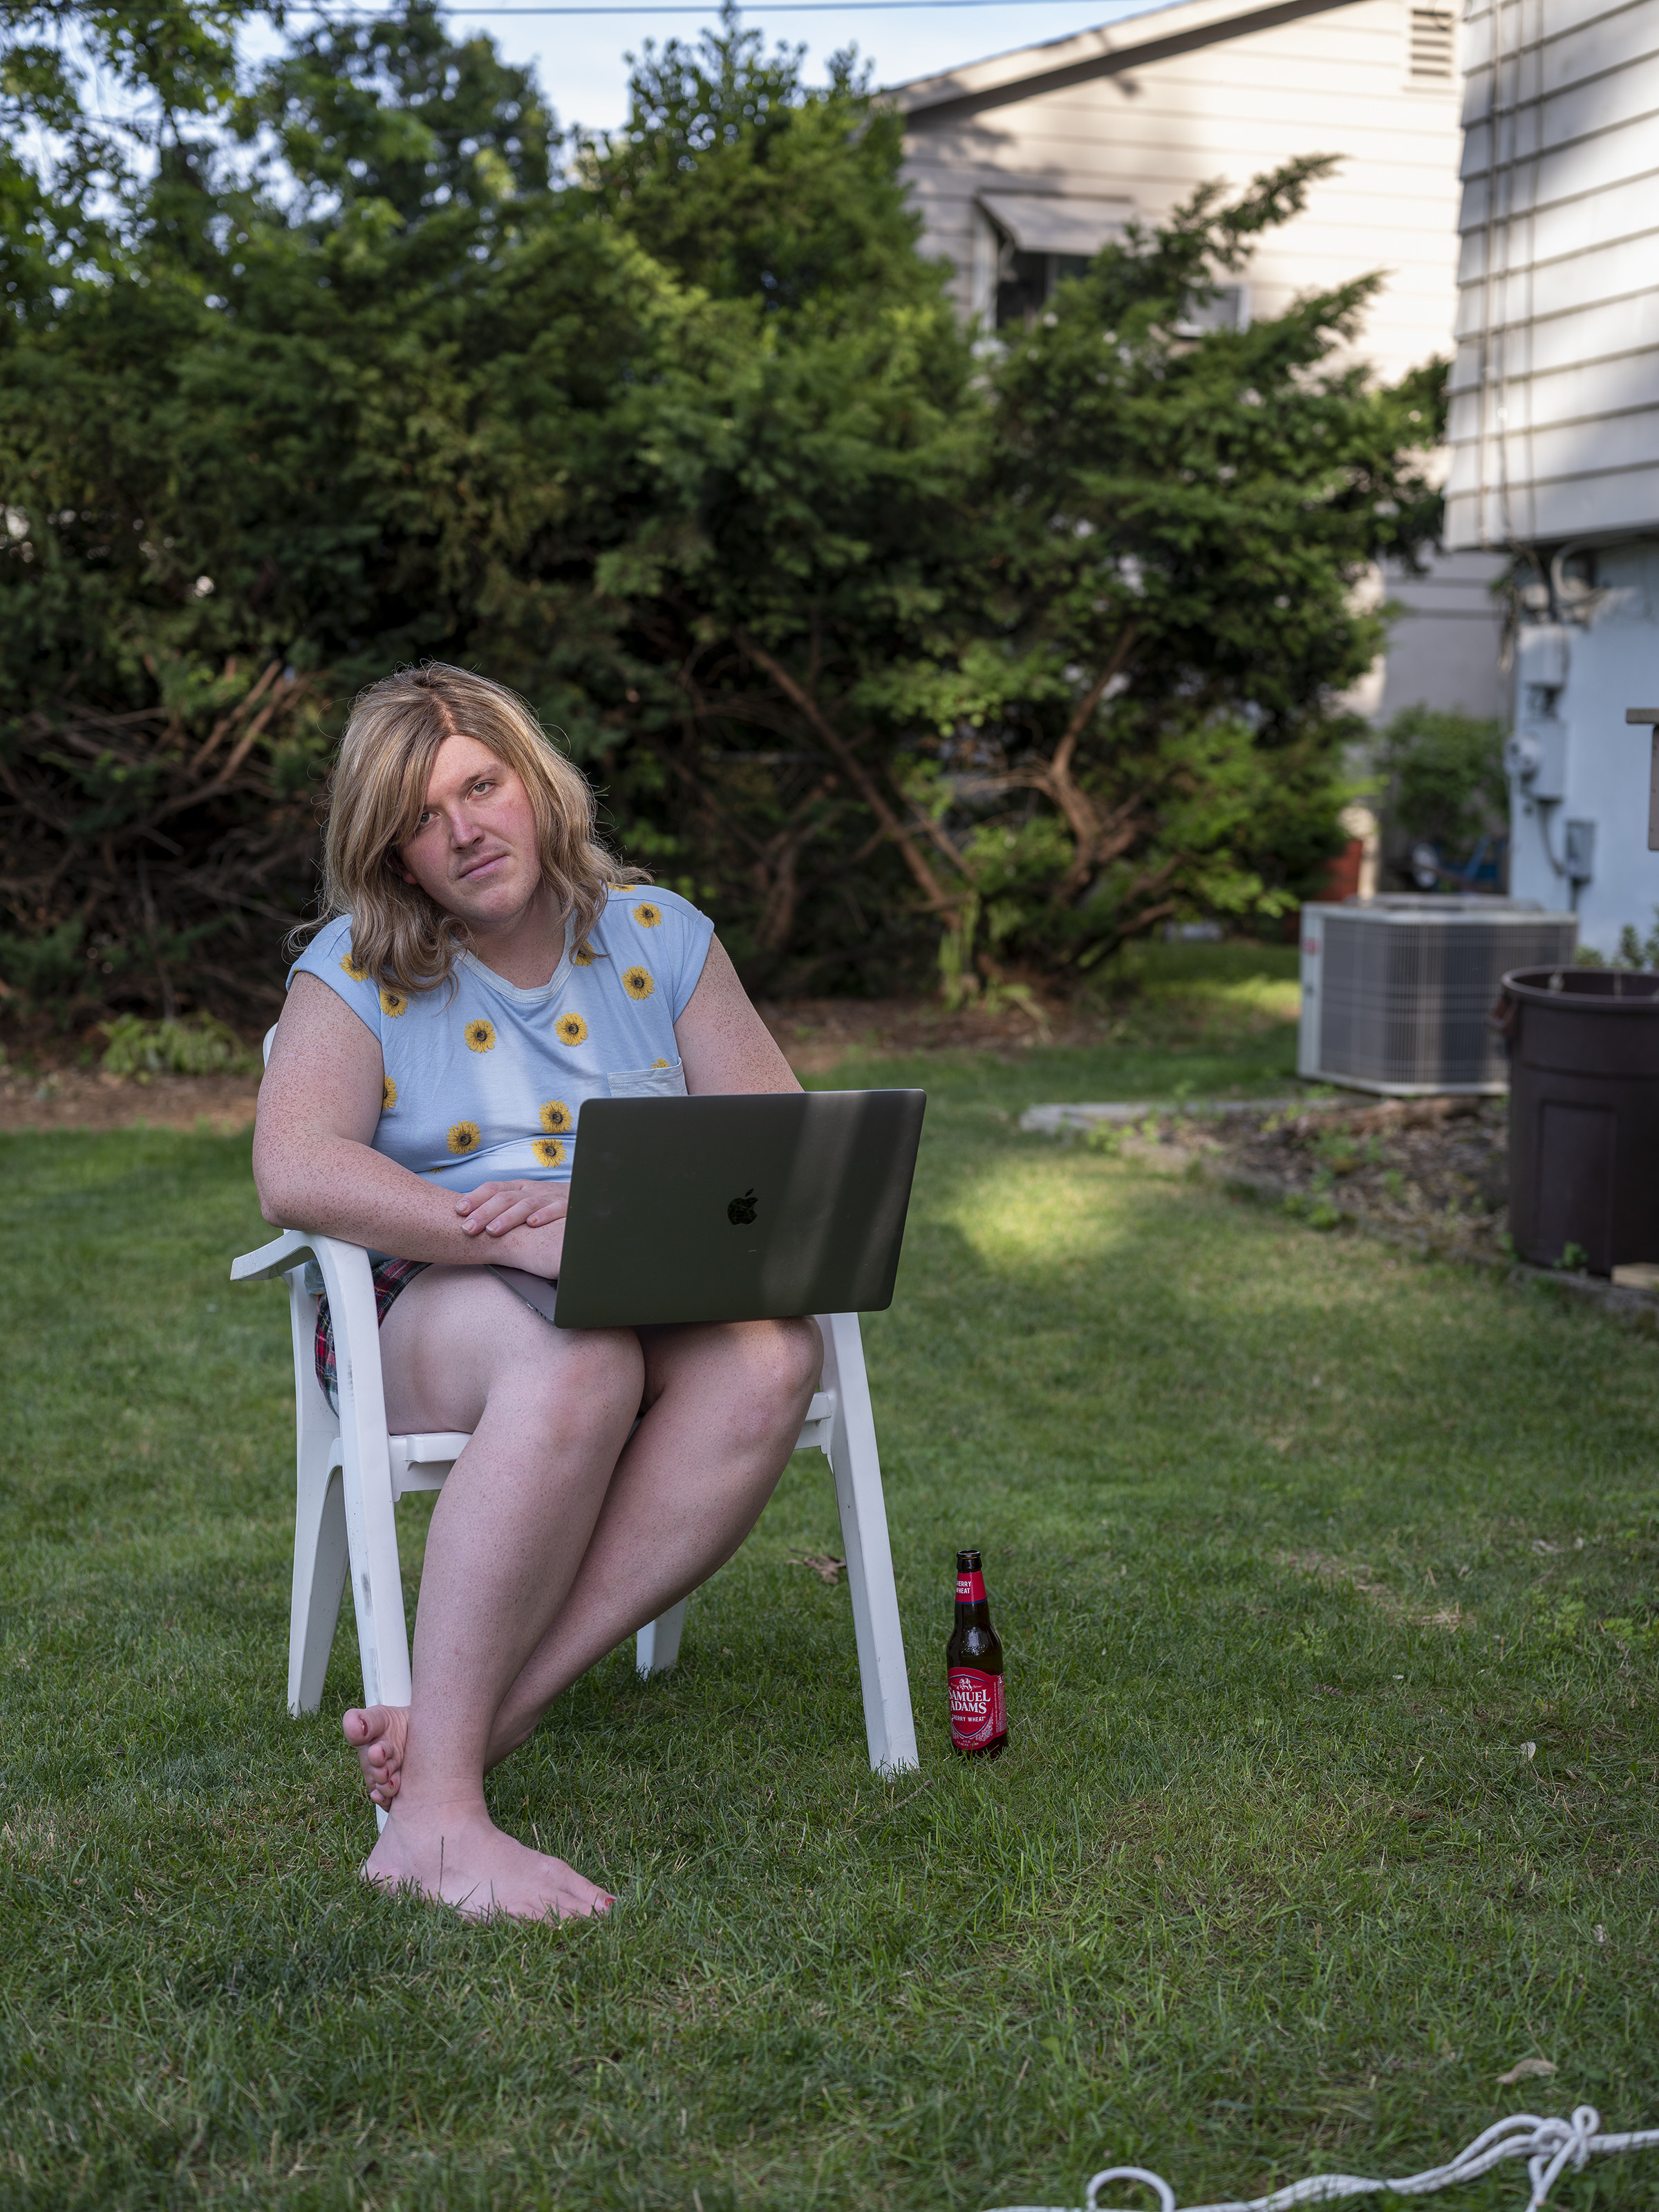 a person in a wig sits in a chair on their lawn with a laptop computer and drinking a beer